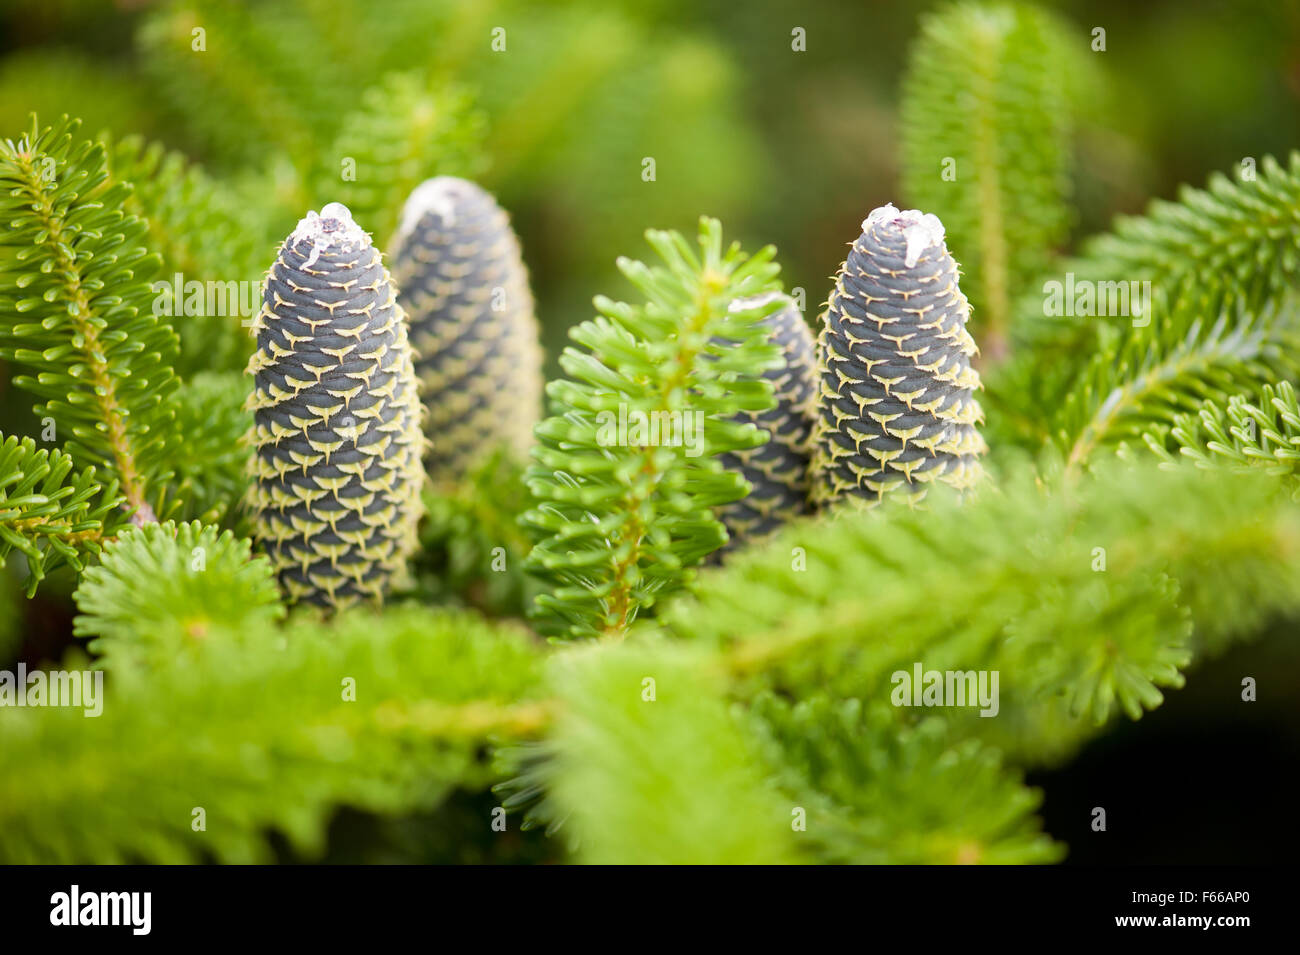 Fir cones fresh twig shoots in June, young evergreen coniferous Abies tree twigs with needle like flattened leaves and cylindric Stock Photo